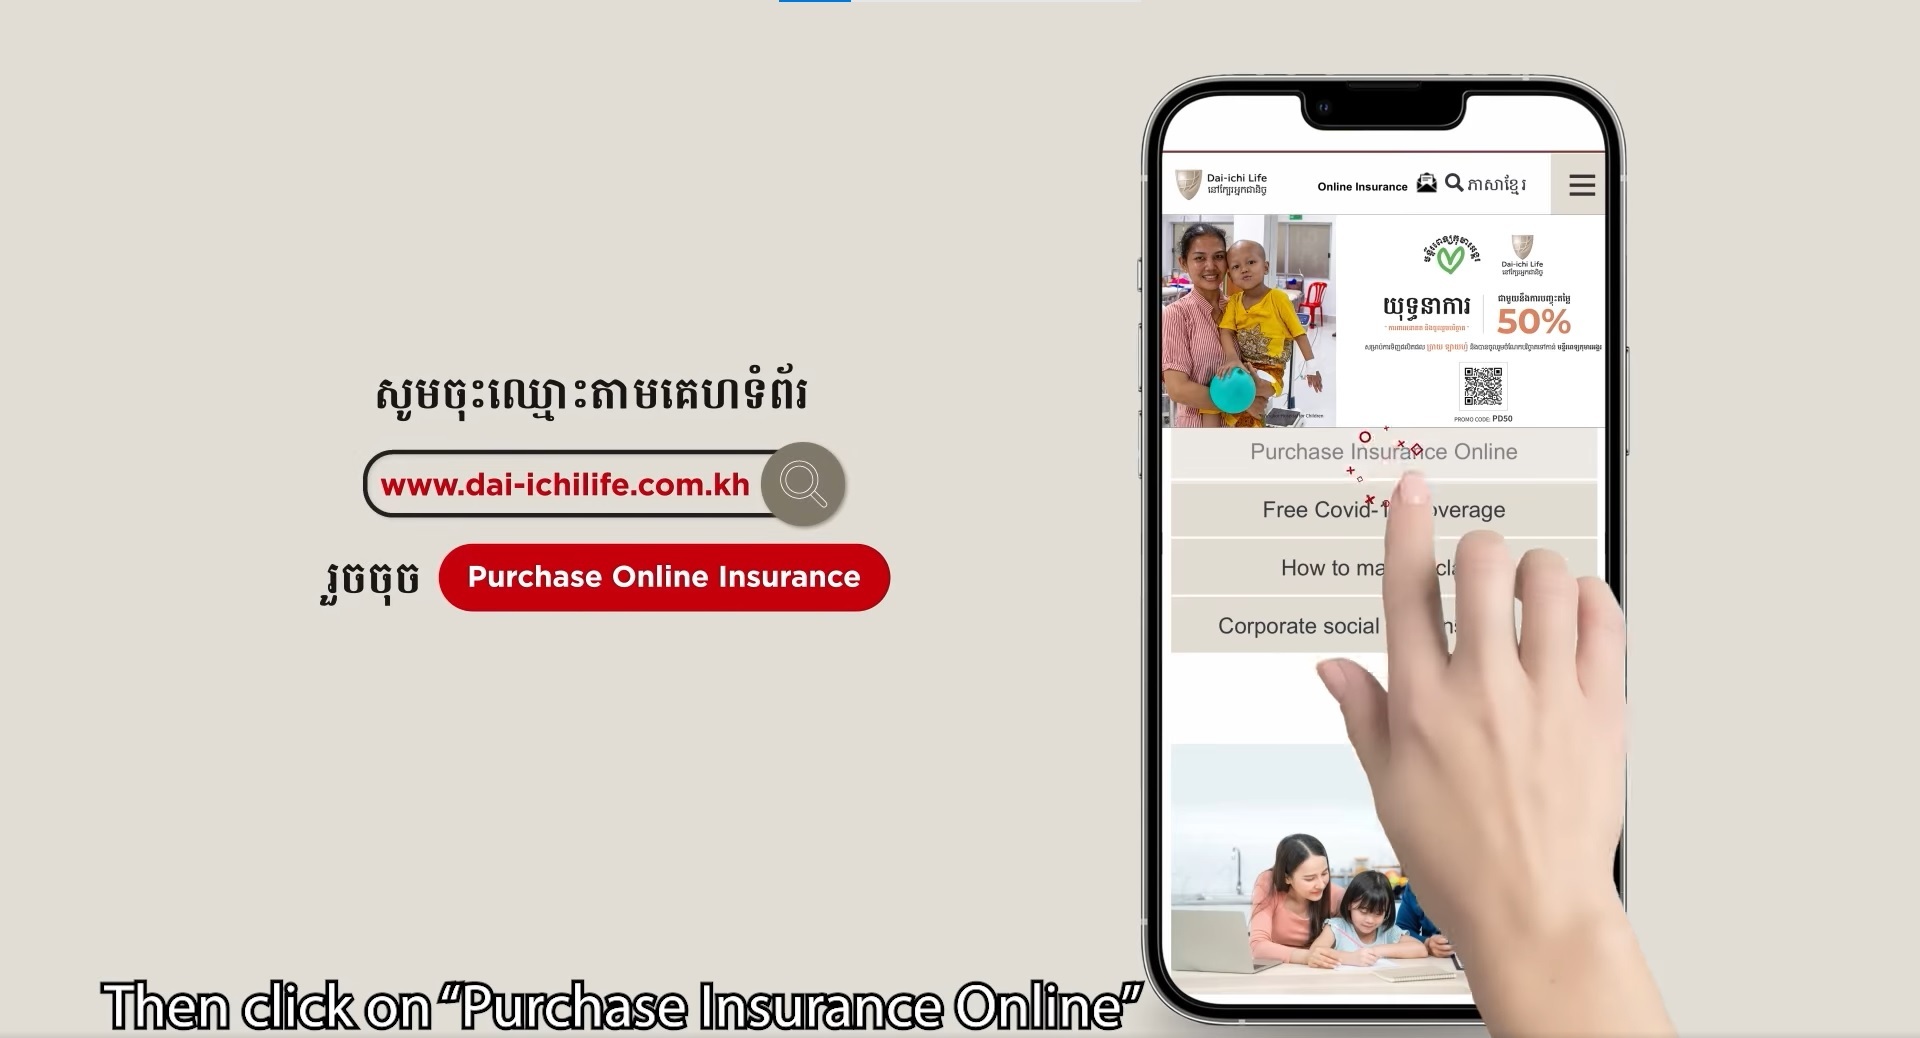 Democrance partners with Dai-ichi Life Cambodia to help launch their first digital life insurance